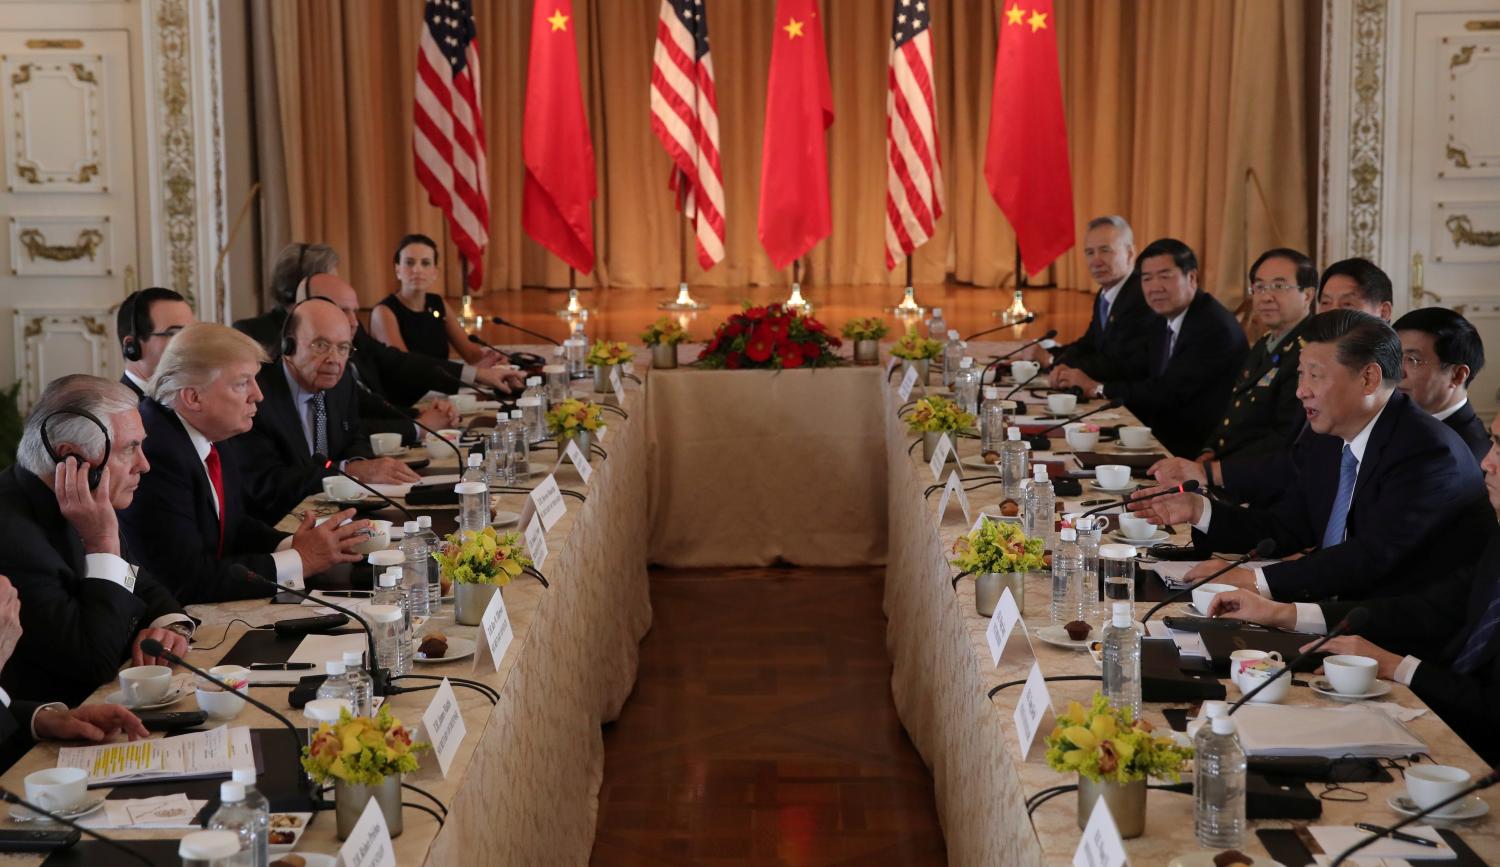 U.S. President Trump holds a bilateral meeting with China's President Xi at Trump's Mar-a-Lago estate in Palm Beach